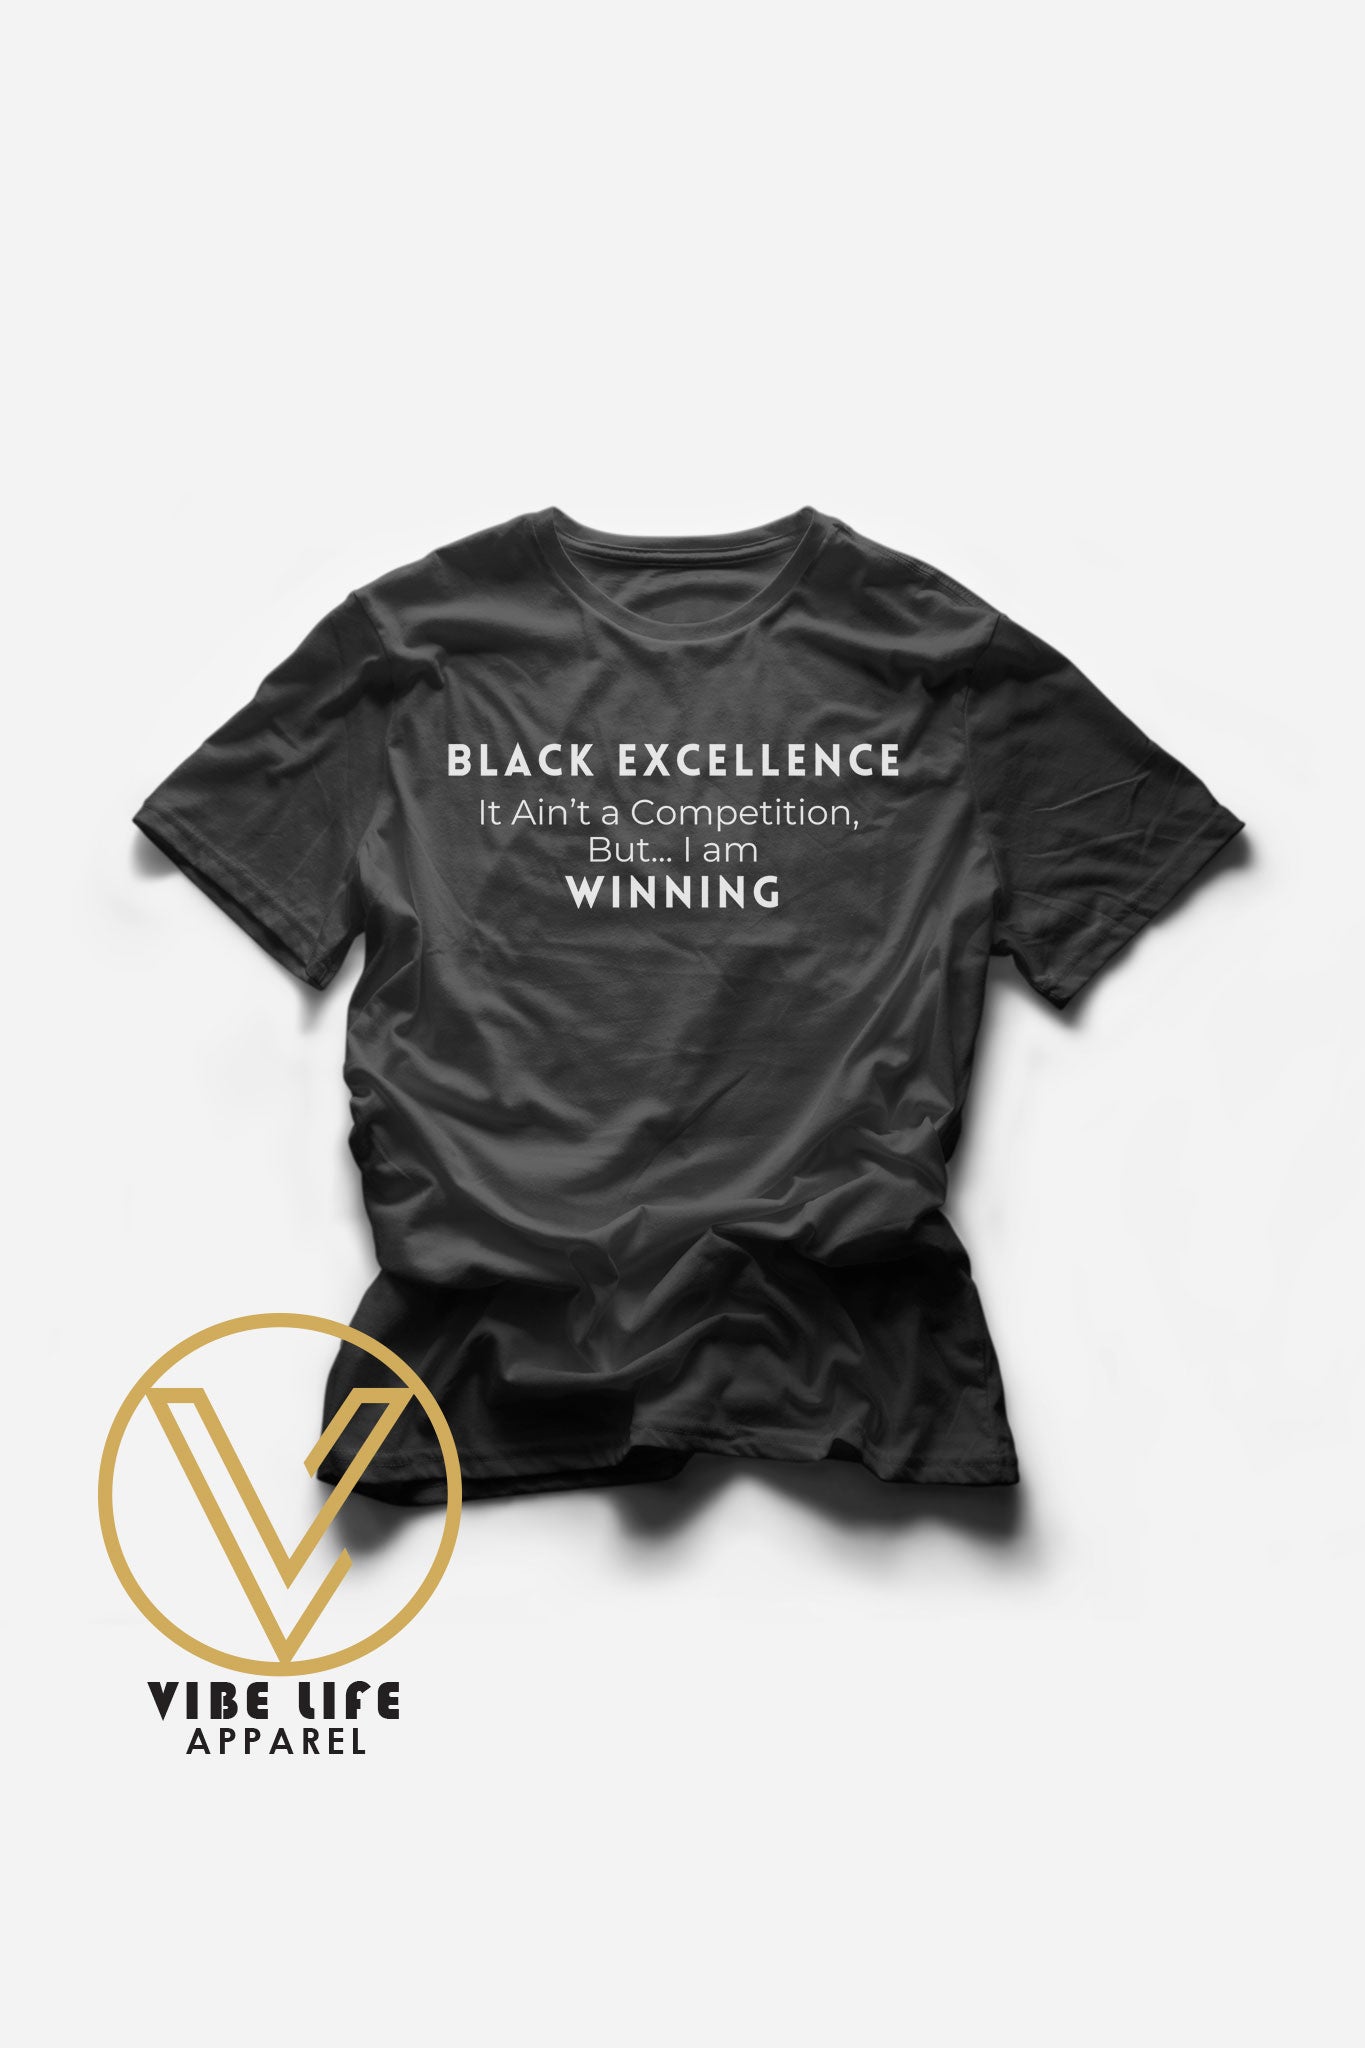 Black Excellence - It Ain't A Competition - But, I'm Winning! - Adult Unisex Tee